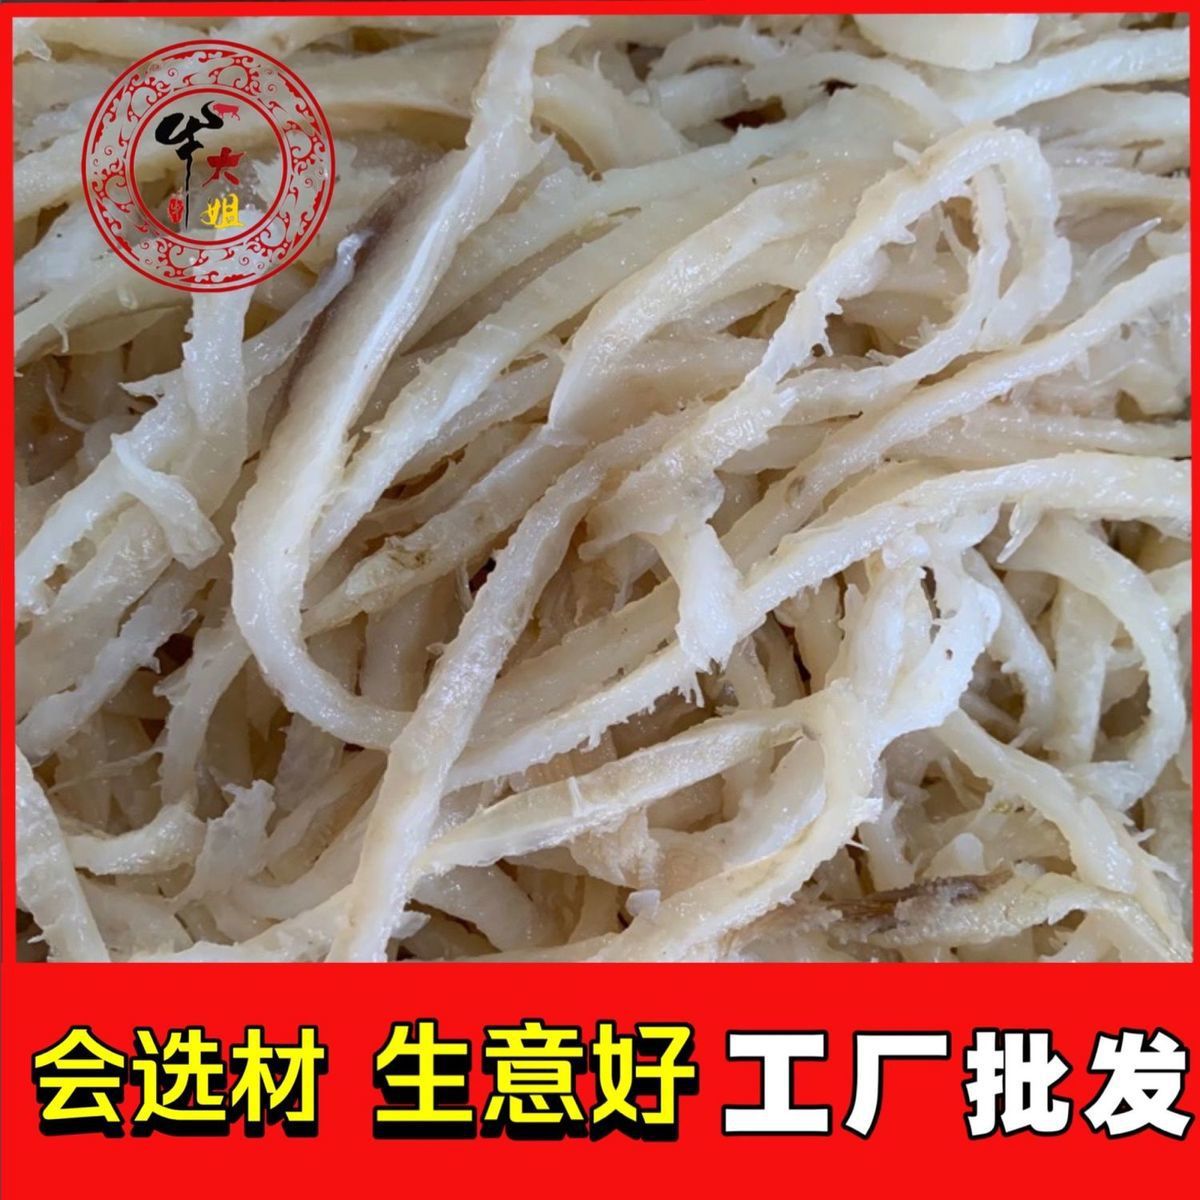 Scrap fresh Beef omasum Backplane 5 black and white numerous layers Tripe Spicy Hot Pot Hot Pot Ingredients